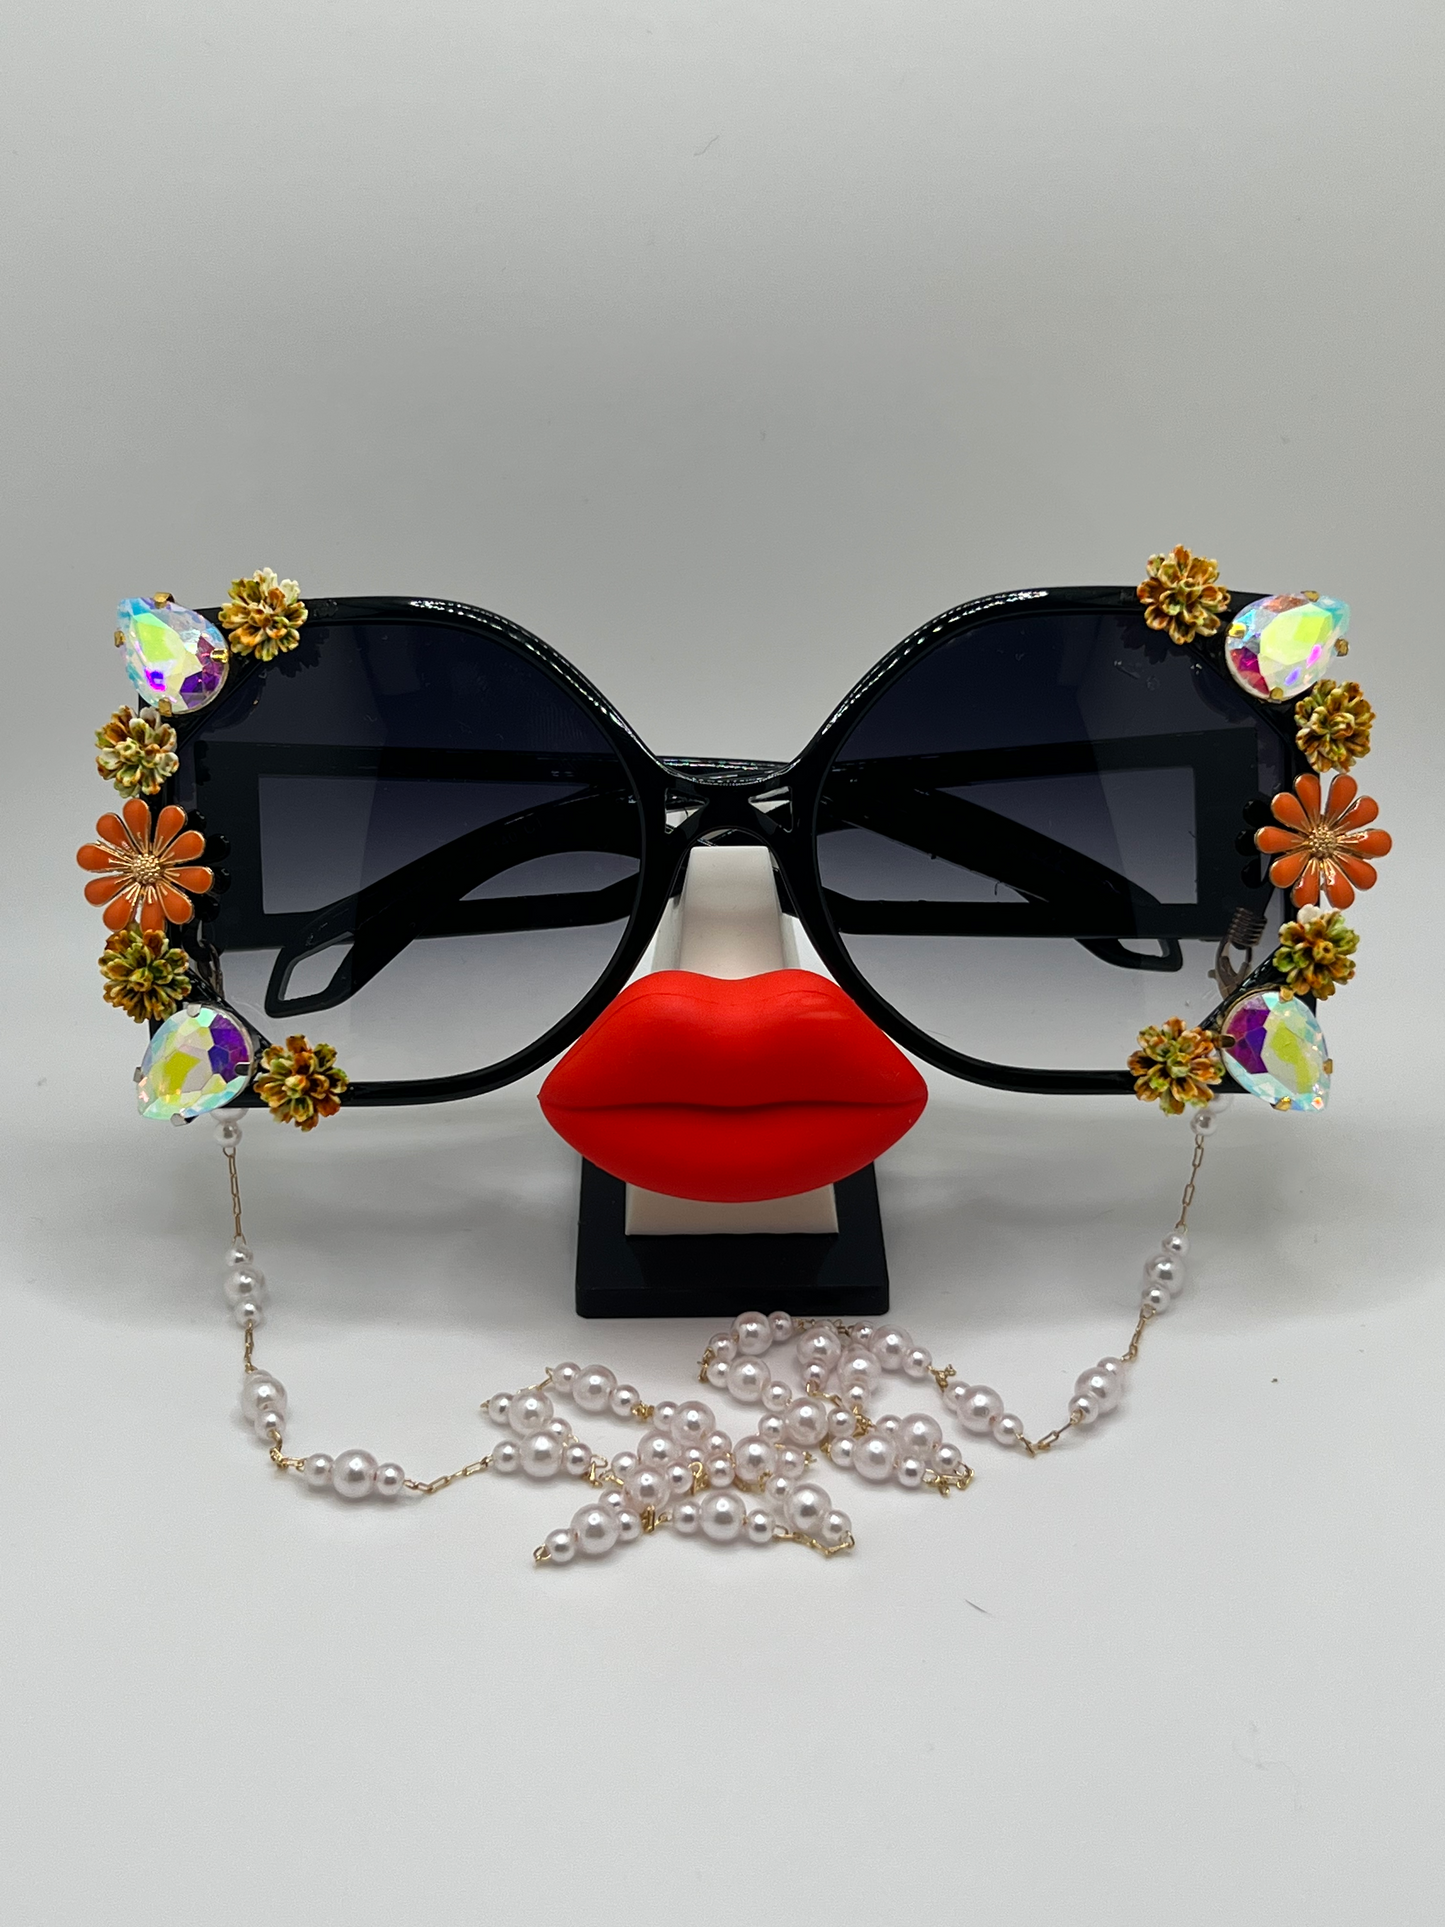 Perfect for tailgating and supporting your Longhorns, these Square-sided, oversized sunglasses are covered in floral and jeweled embellishments and come with a removable chain.